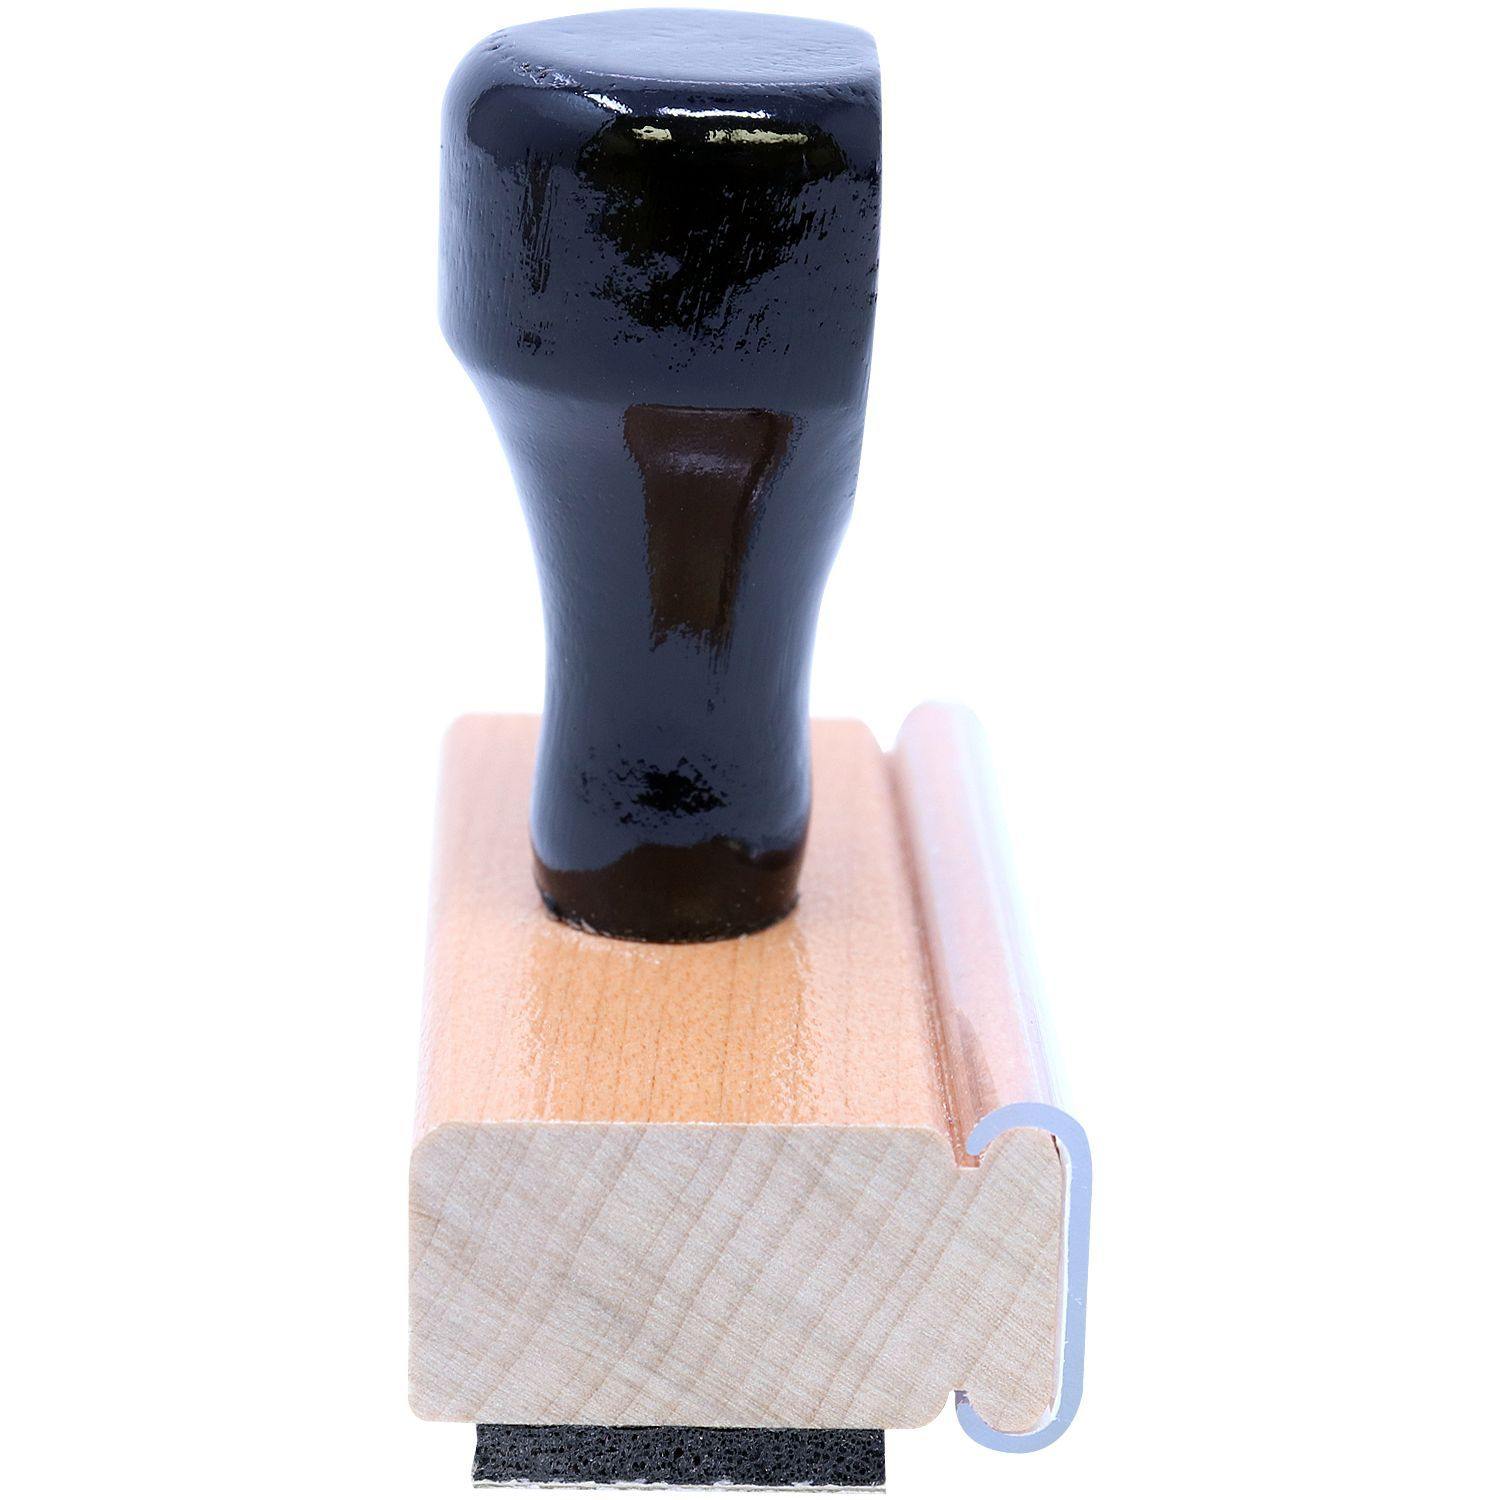 Large Standard Mail Stacked Rubber Stamp - Engineer Seal Stamps - Brand_Acorn, Impression Size_Large, Stamp Type_Regular Stamp, Type of Use_Postal & Mailing